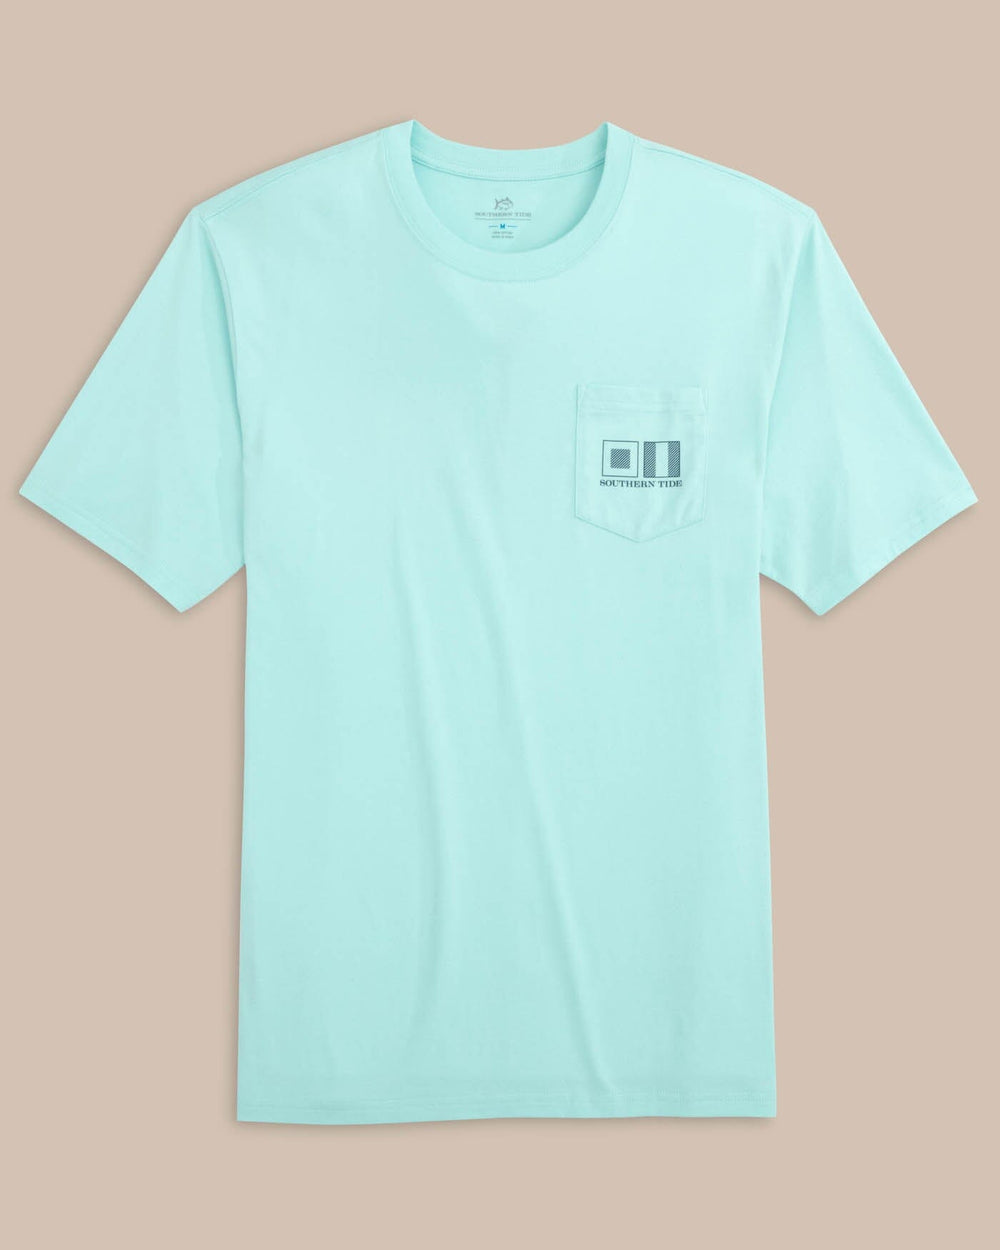 The front view of the Southern Tide ST Striped Flags Short Sleeve T-shirt by Southern Tide - Wake Blue